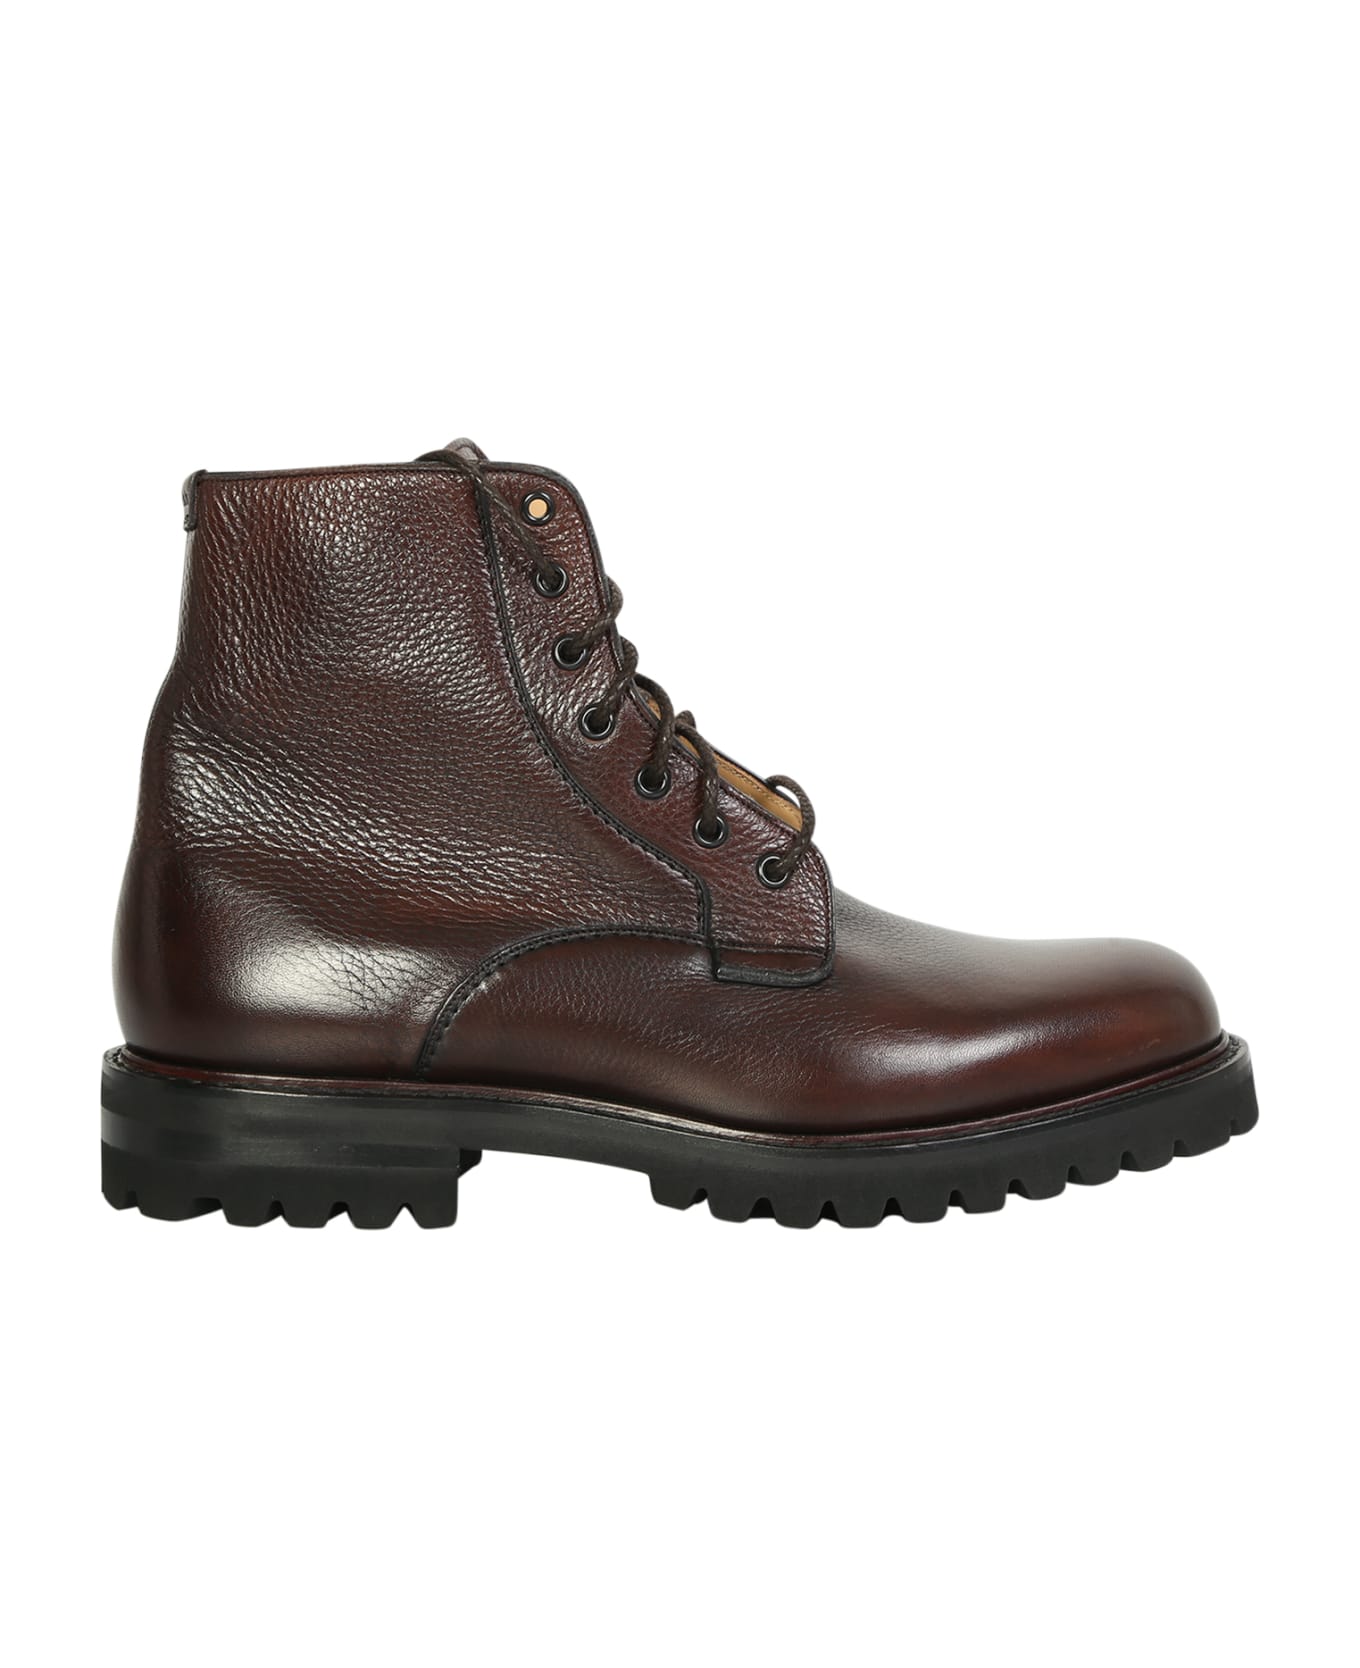 Church's Coalport Ankle Boots - Brown ブーツ